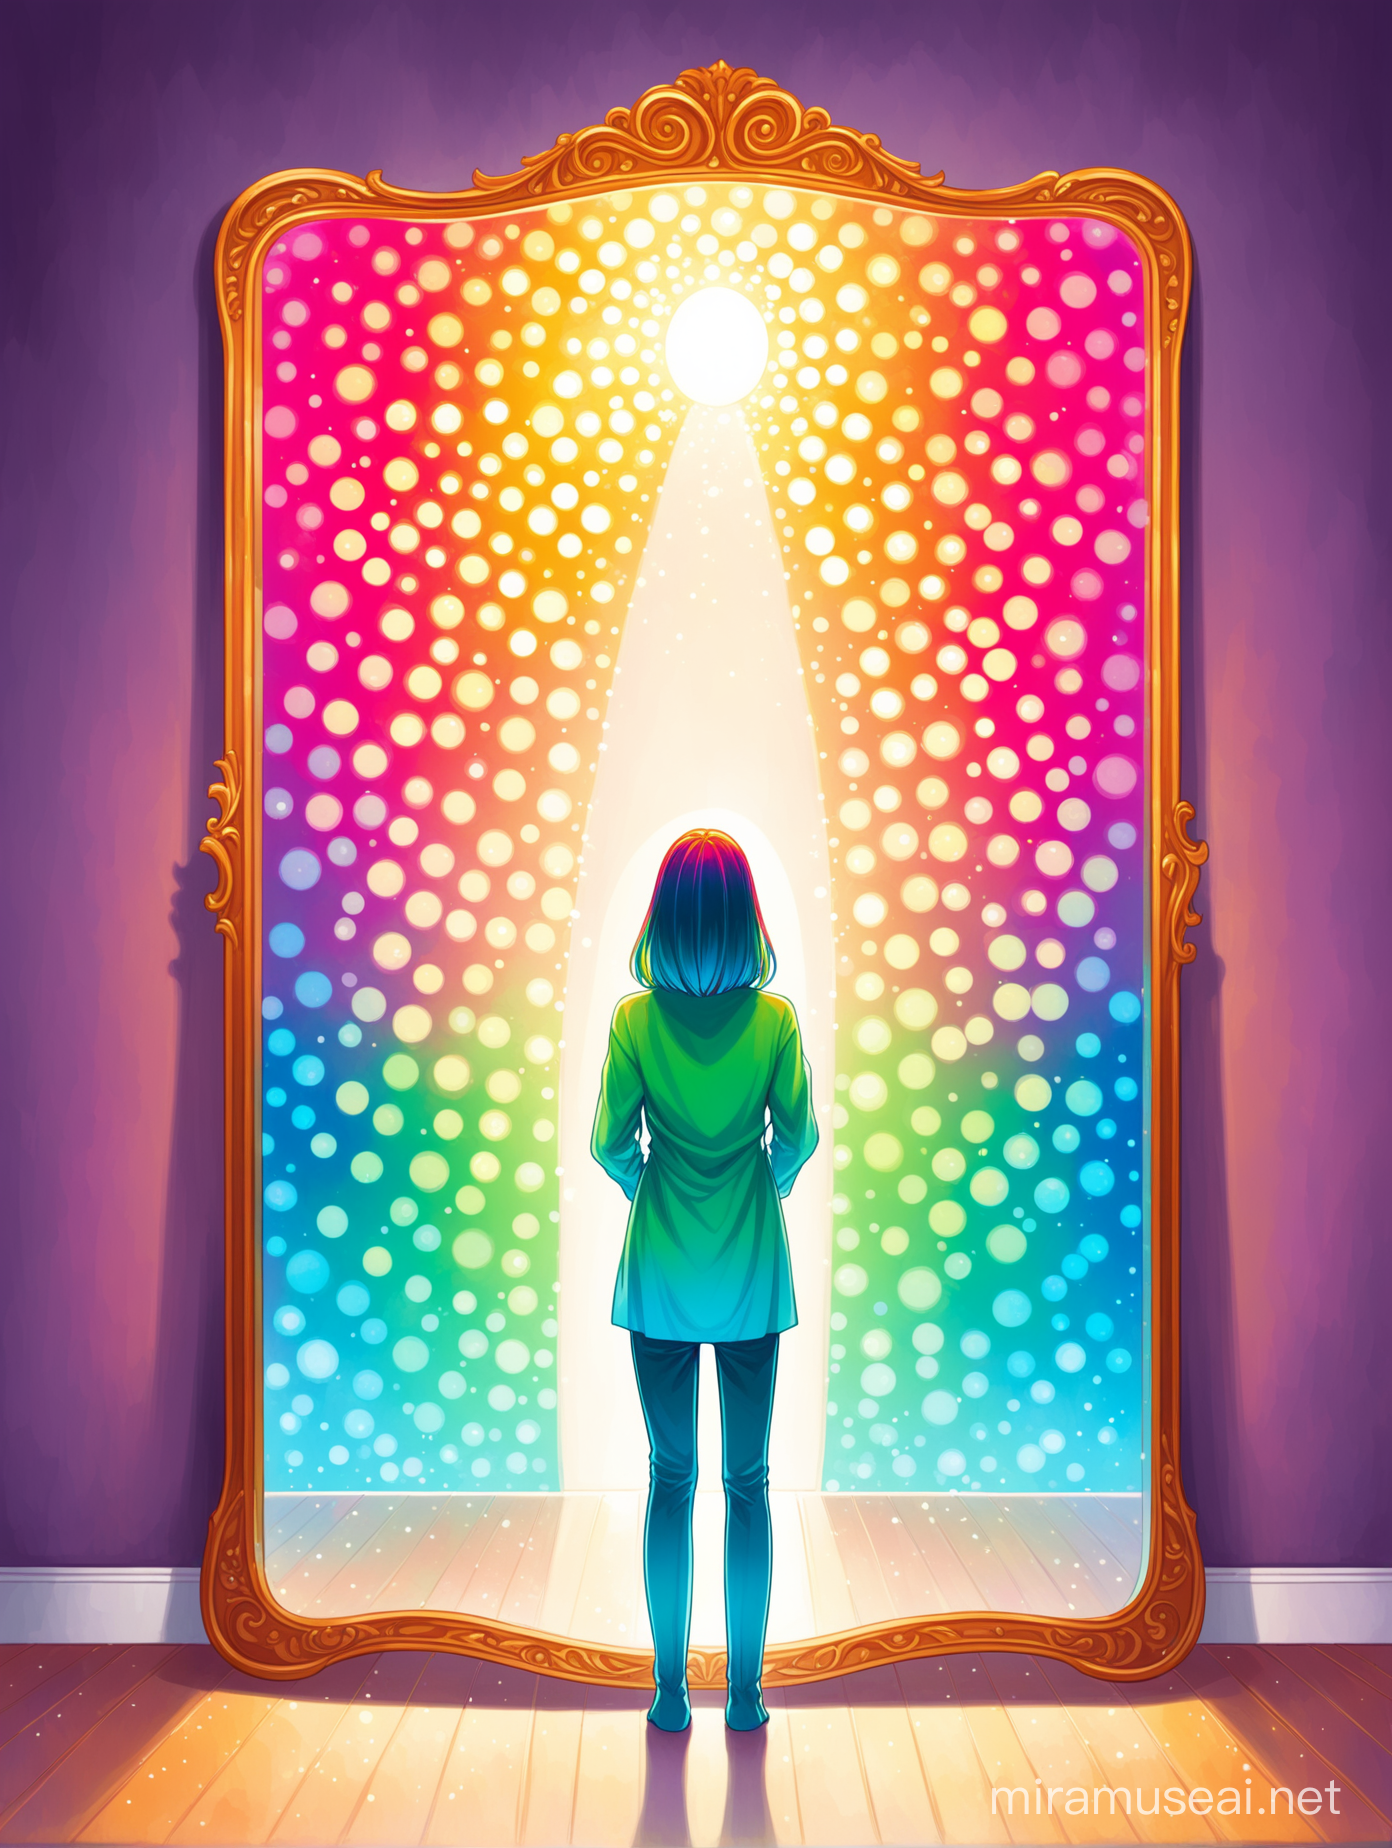 a person standing in front of a mirror, In the mirror, their opinions are depicted as vibrant colors emanating from their mind